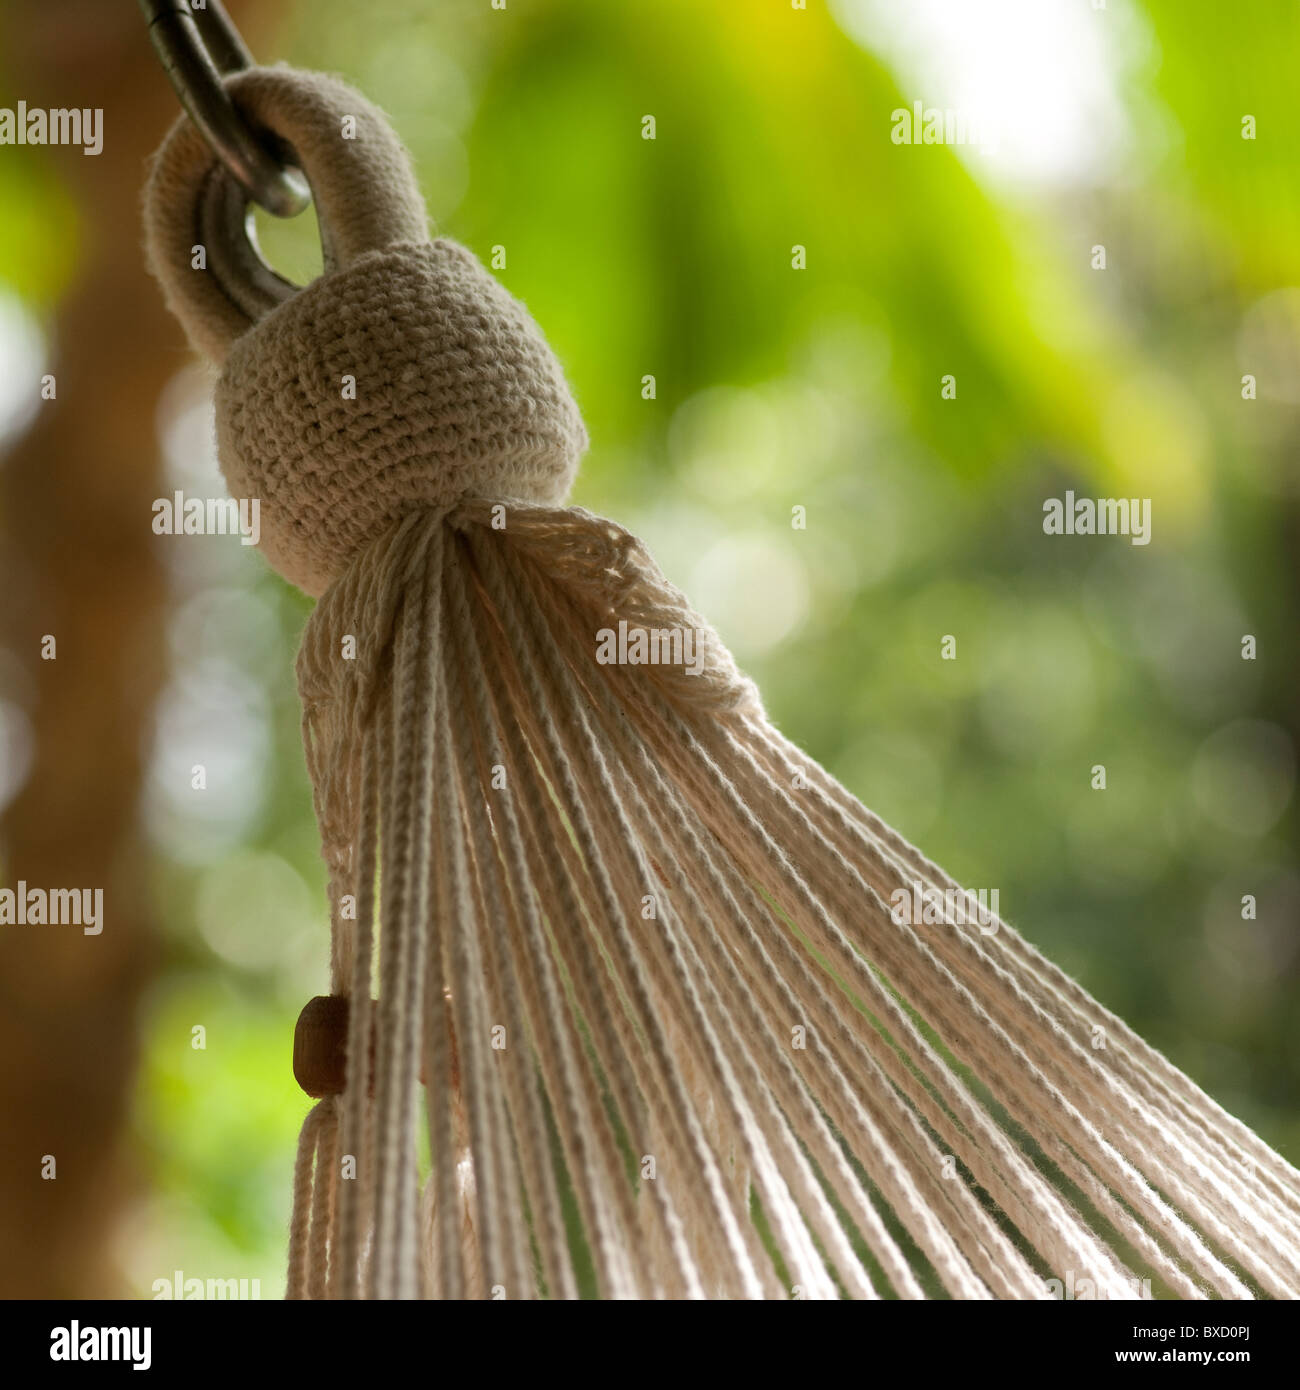 End cords of a hanging hammock in Costa Rica Stock Photo